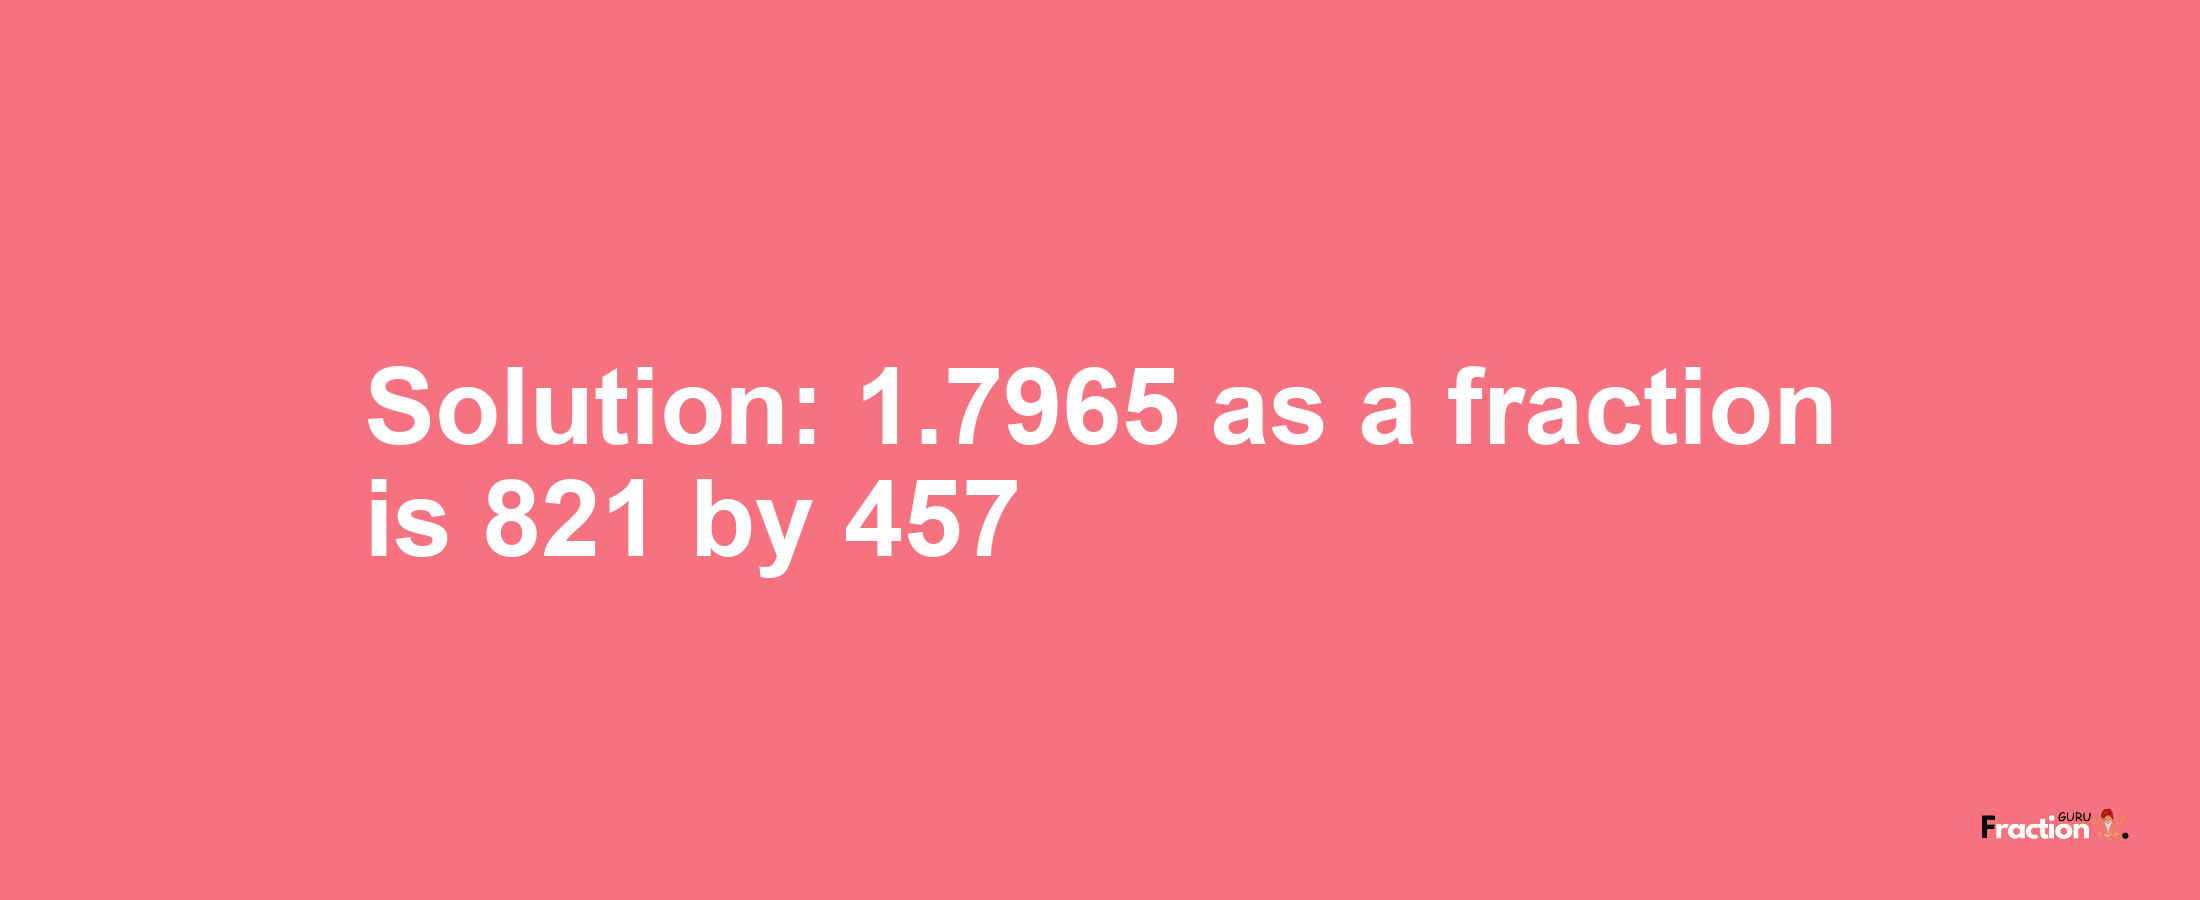 Solution:1.7965 as a fraction is 821/457